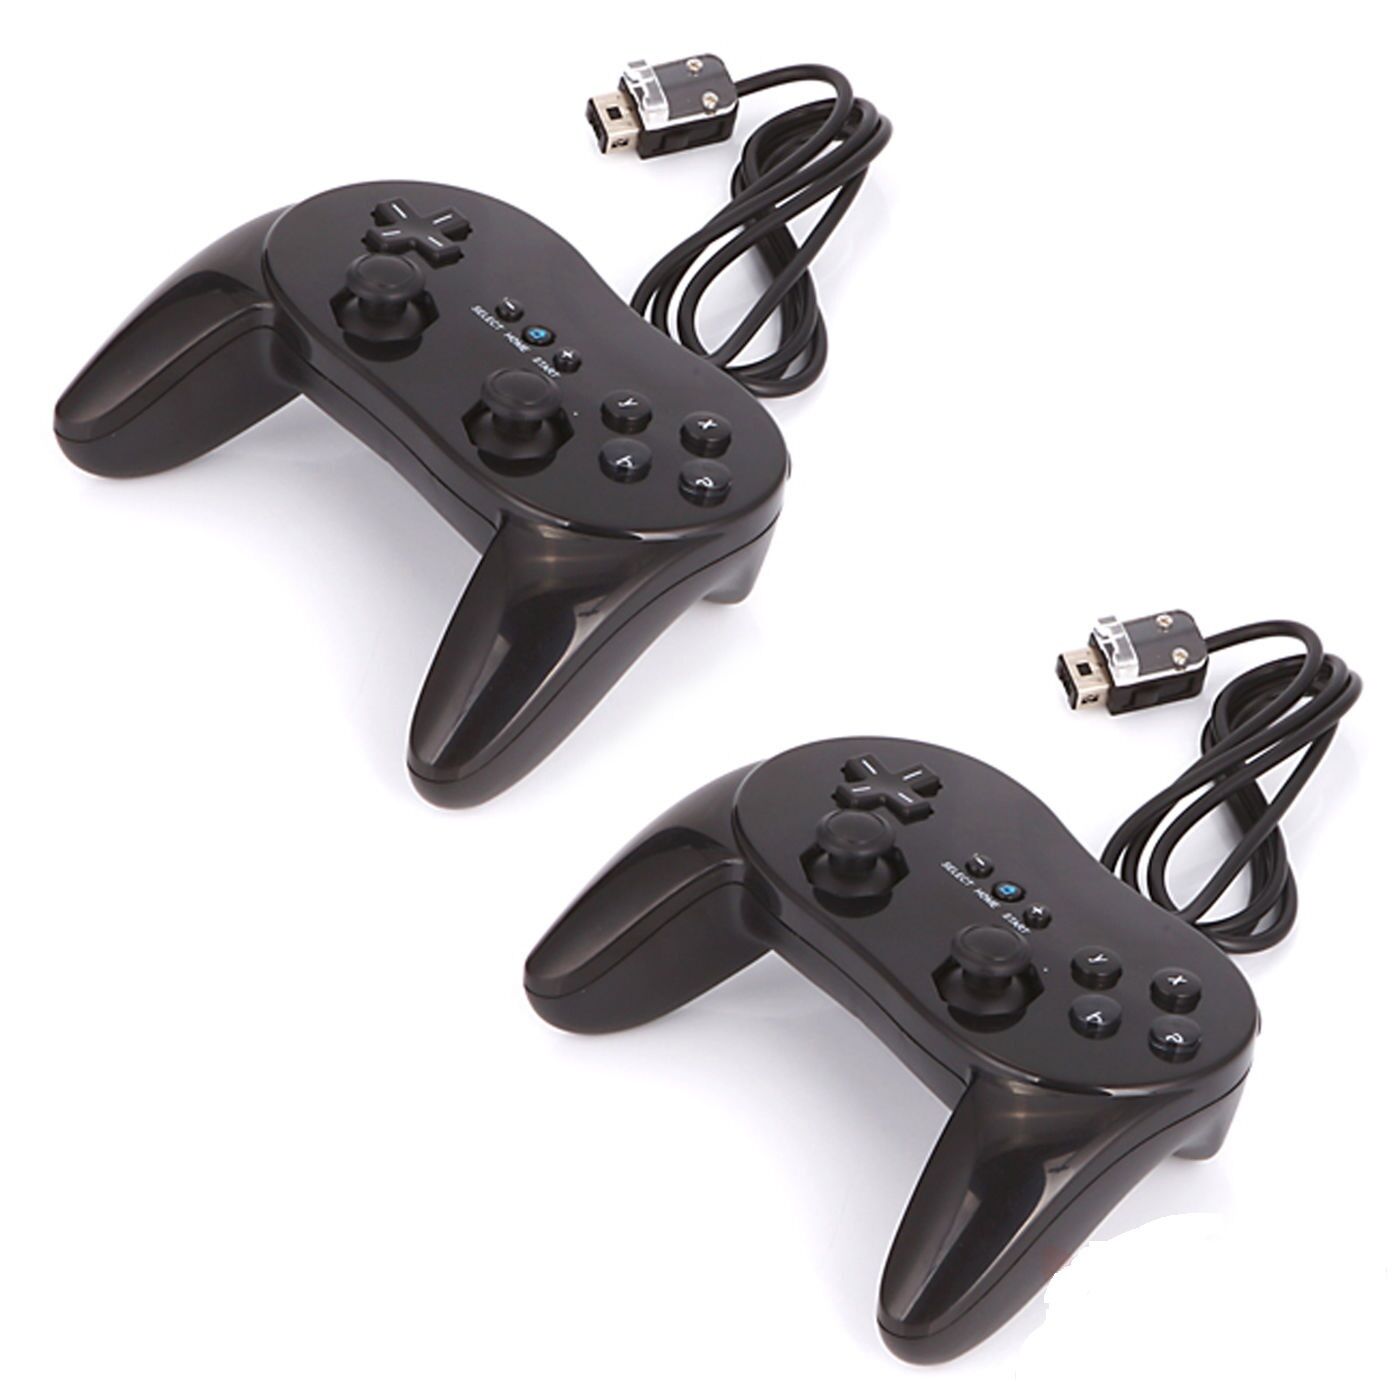 2 X Black Pro Classic Joypad Wired Game Controller Remote For Nintendo Wii Us